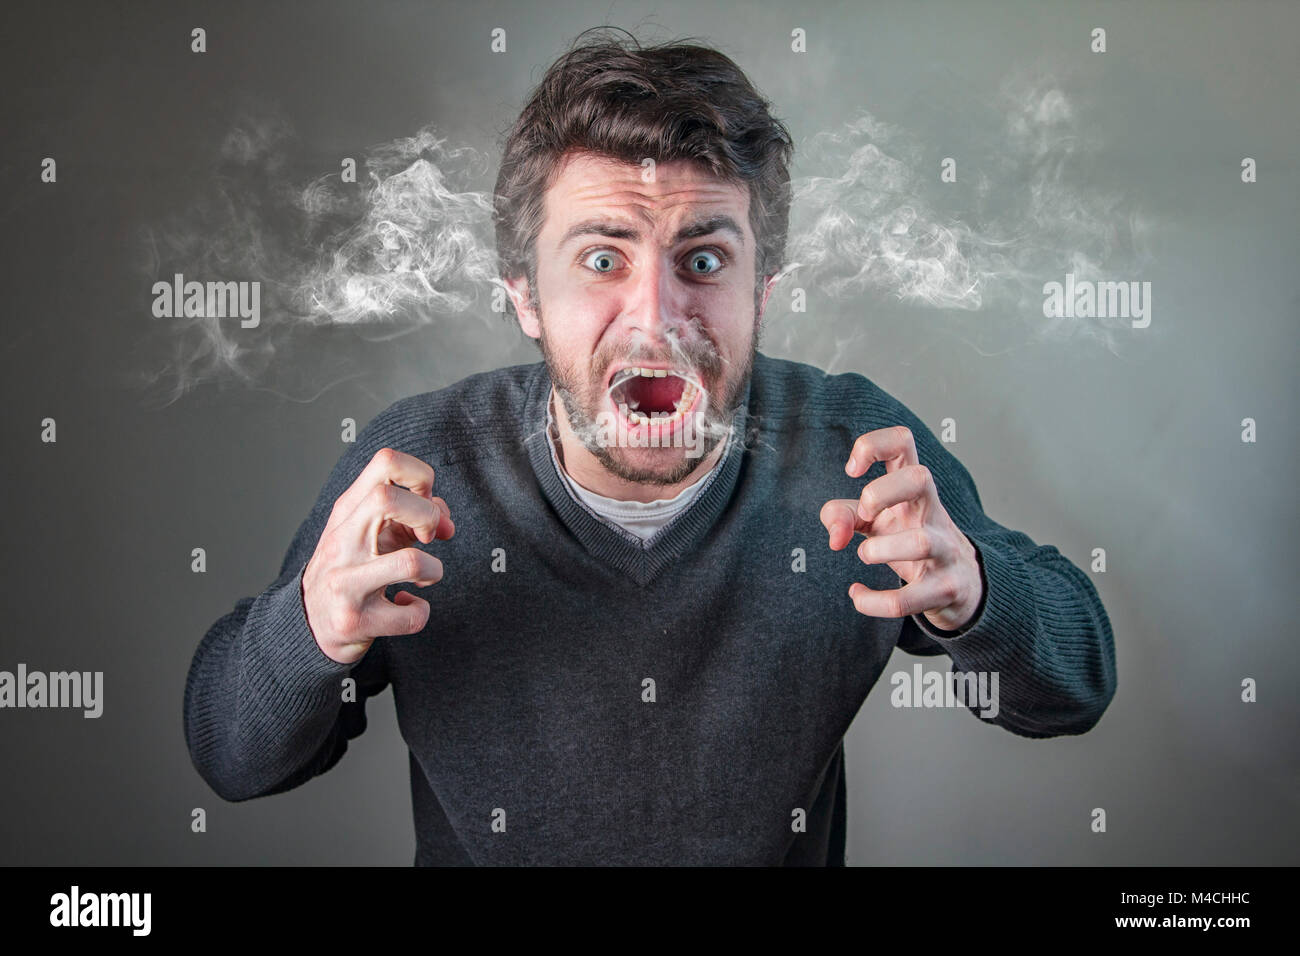 Furious man steaming with rage Stock Photo